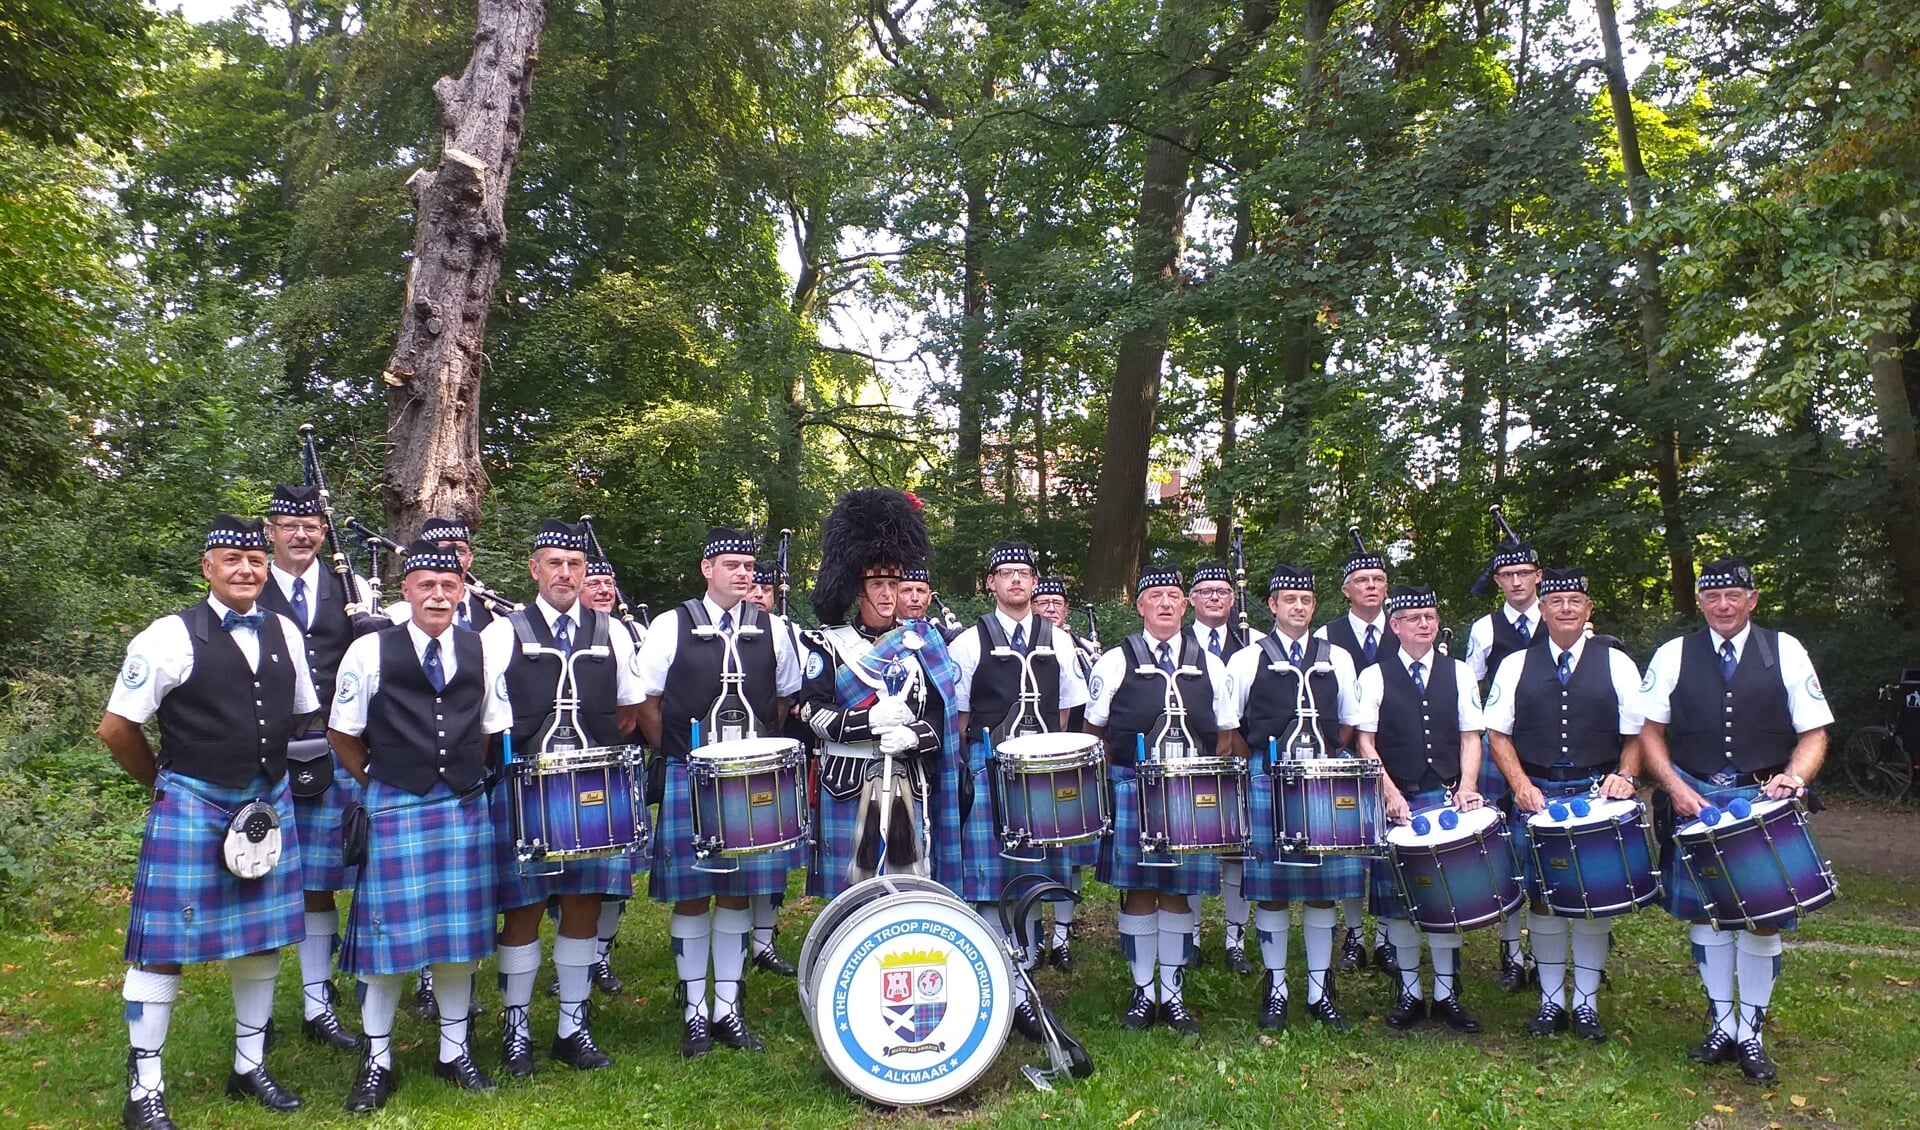 The Arthur Troop Pipes and Drums.